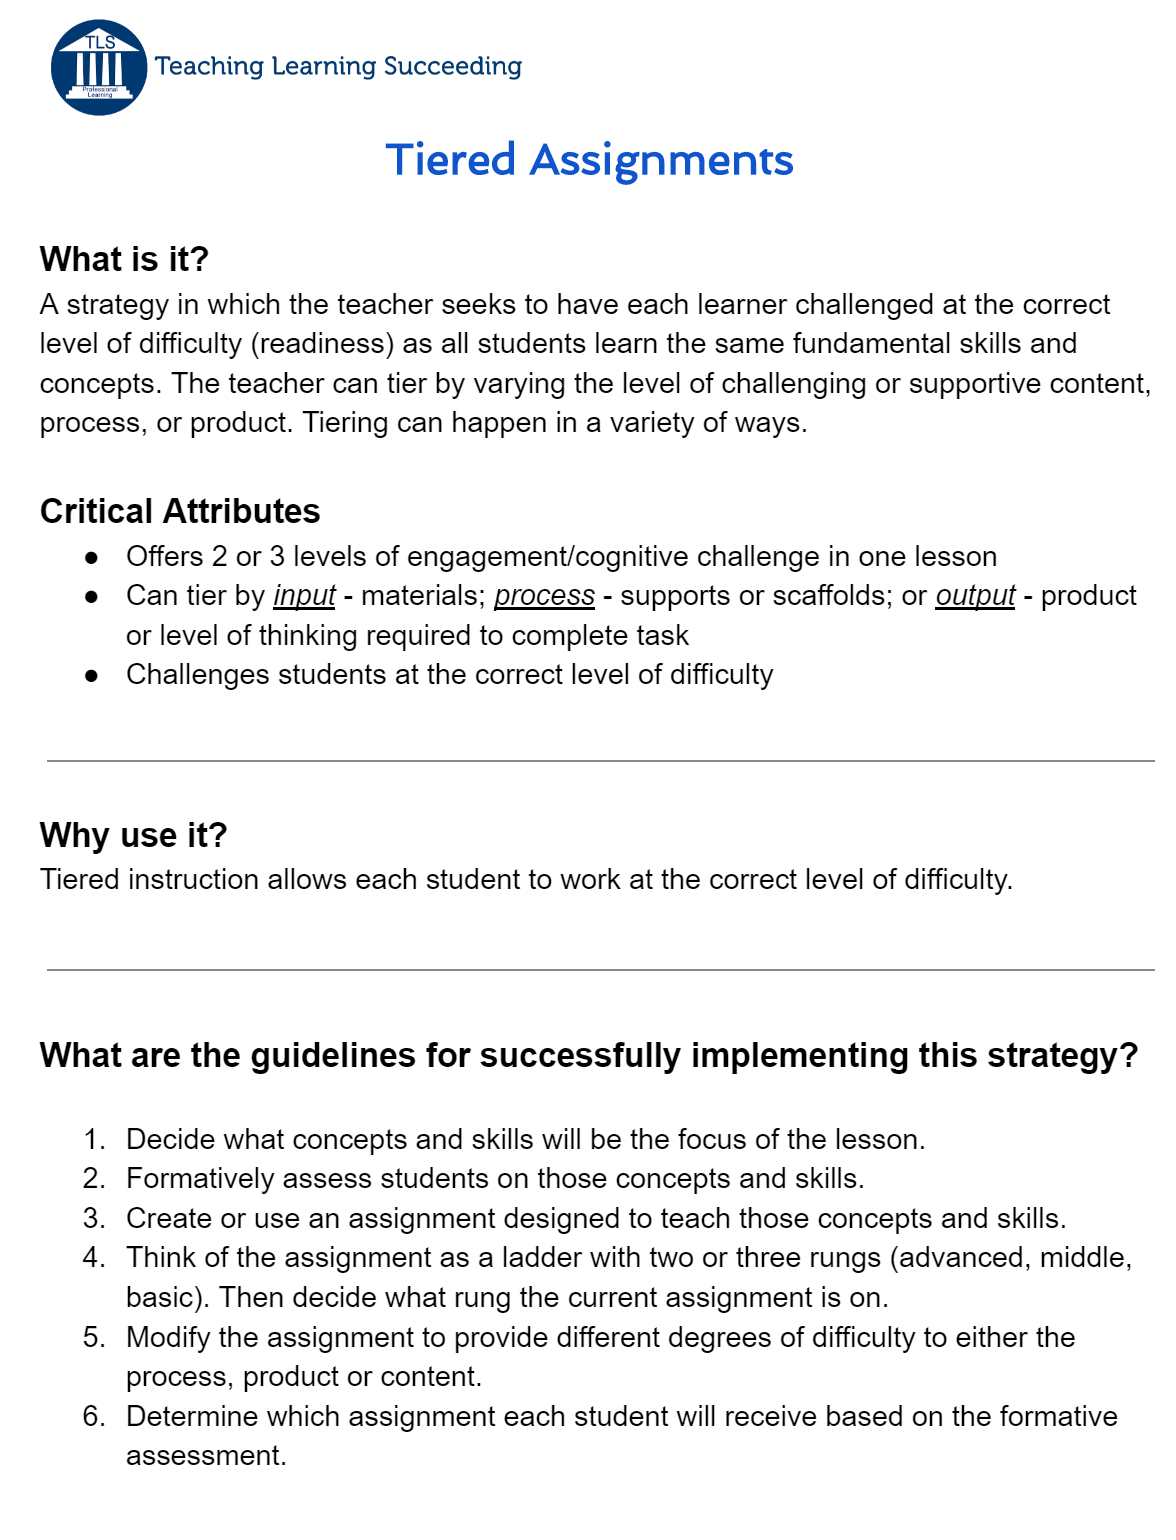 tiered assignments teaching strategy